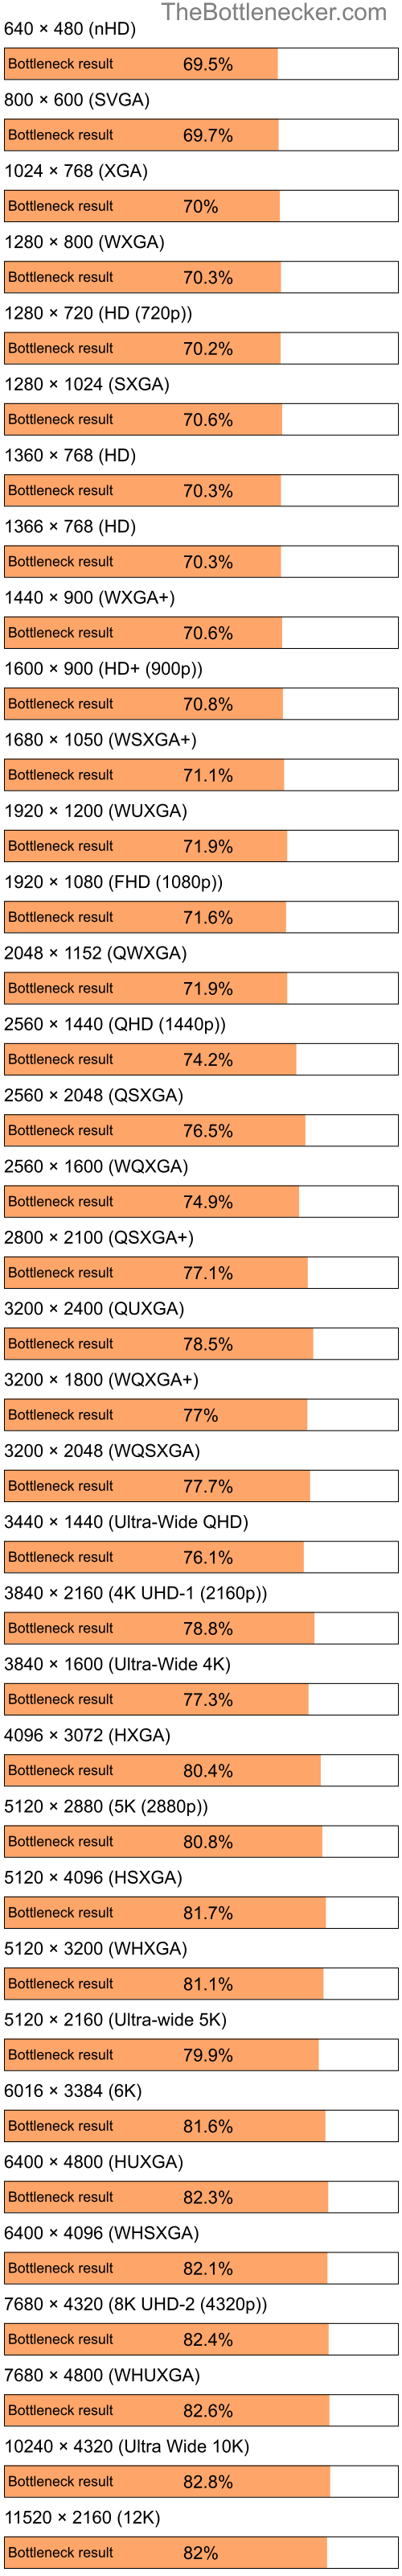 Bottleneck results by resolution for Intel Pentium 4 and NVIDIA GeForce G 103M in General Tasks